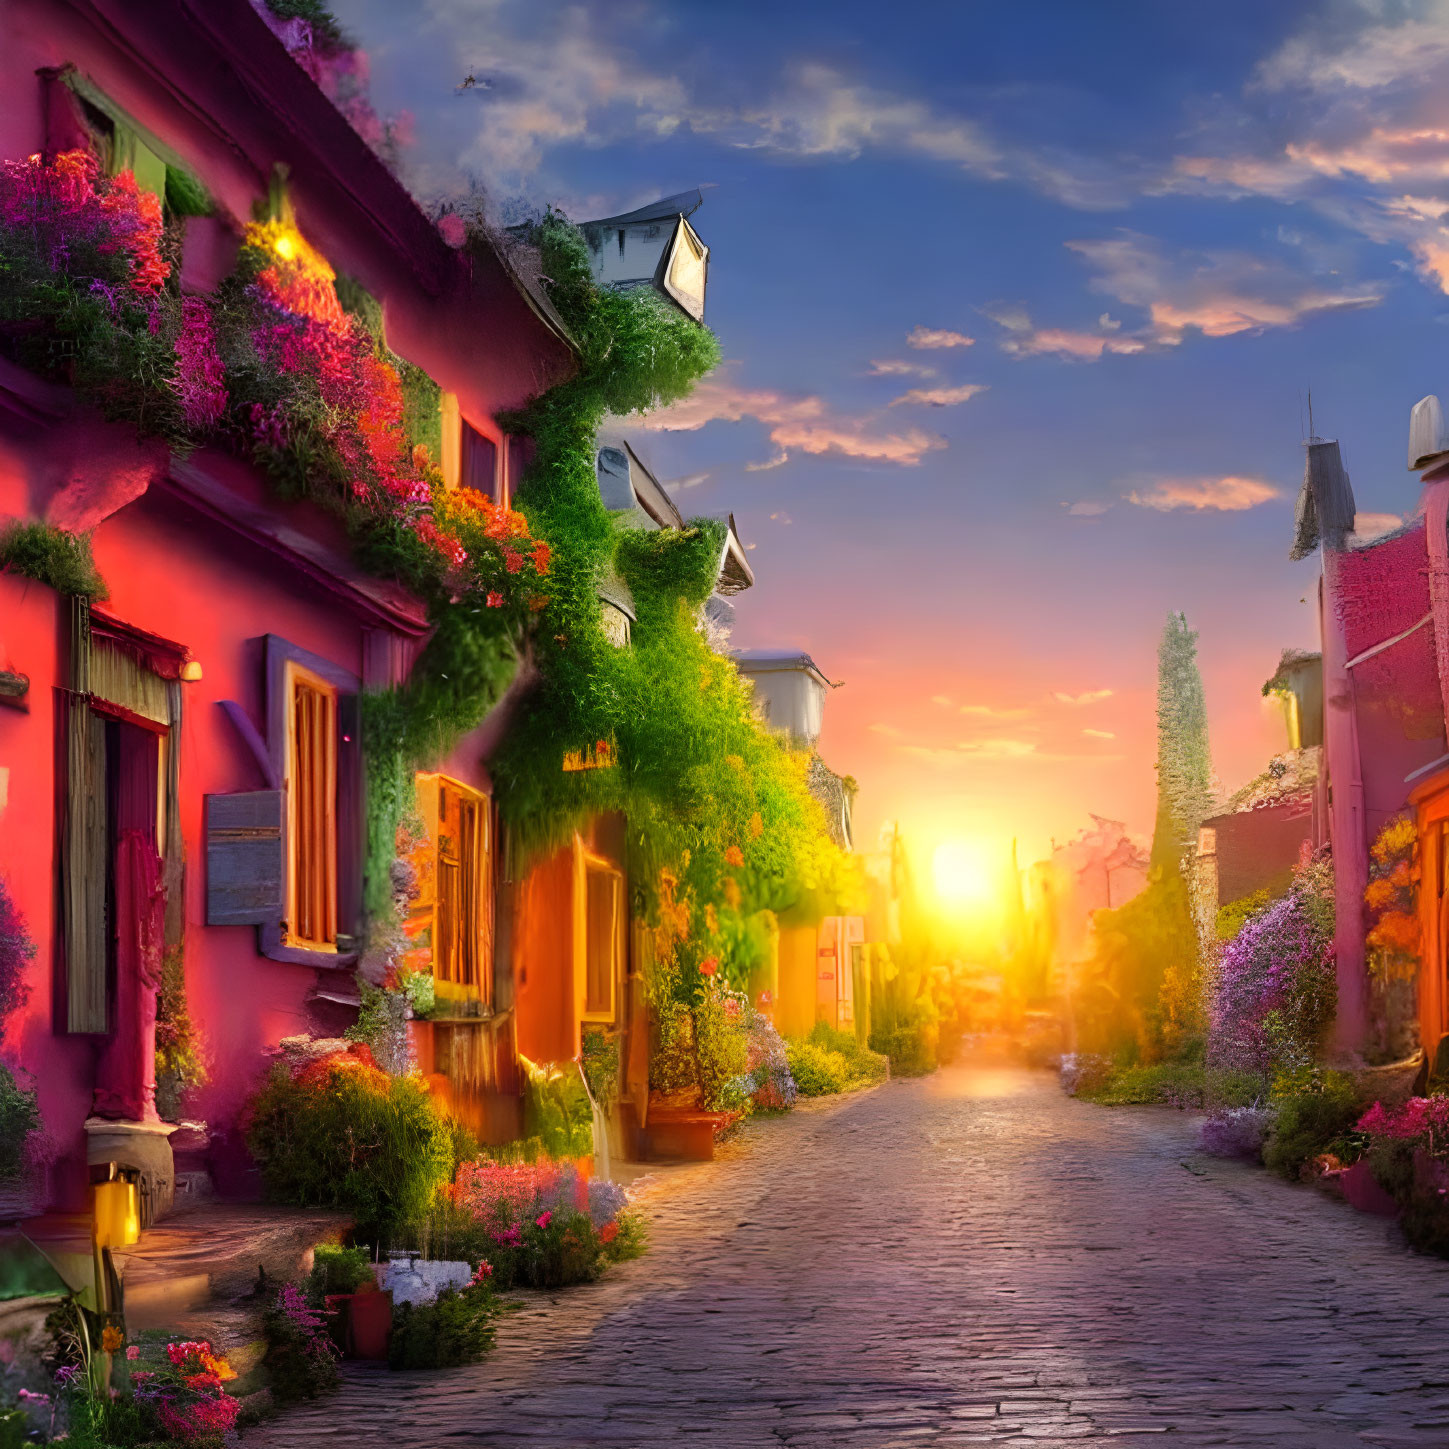 Sunset In The Alley